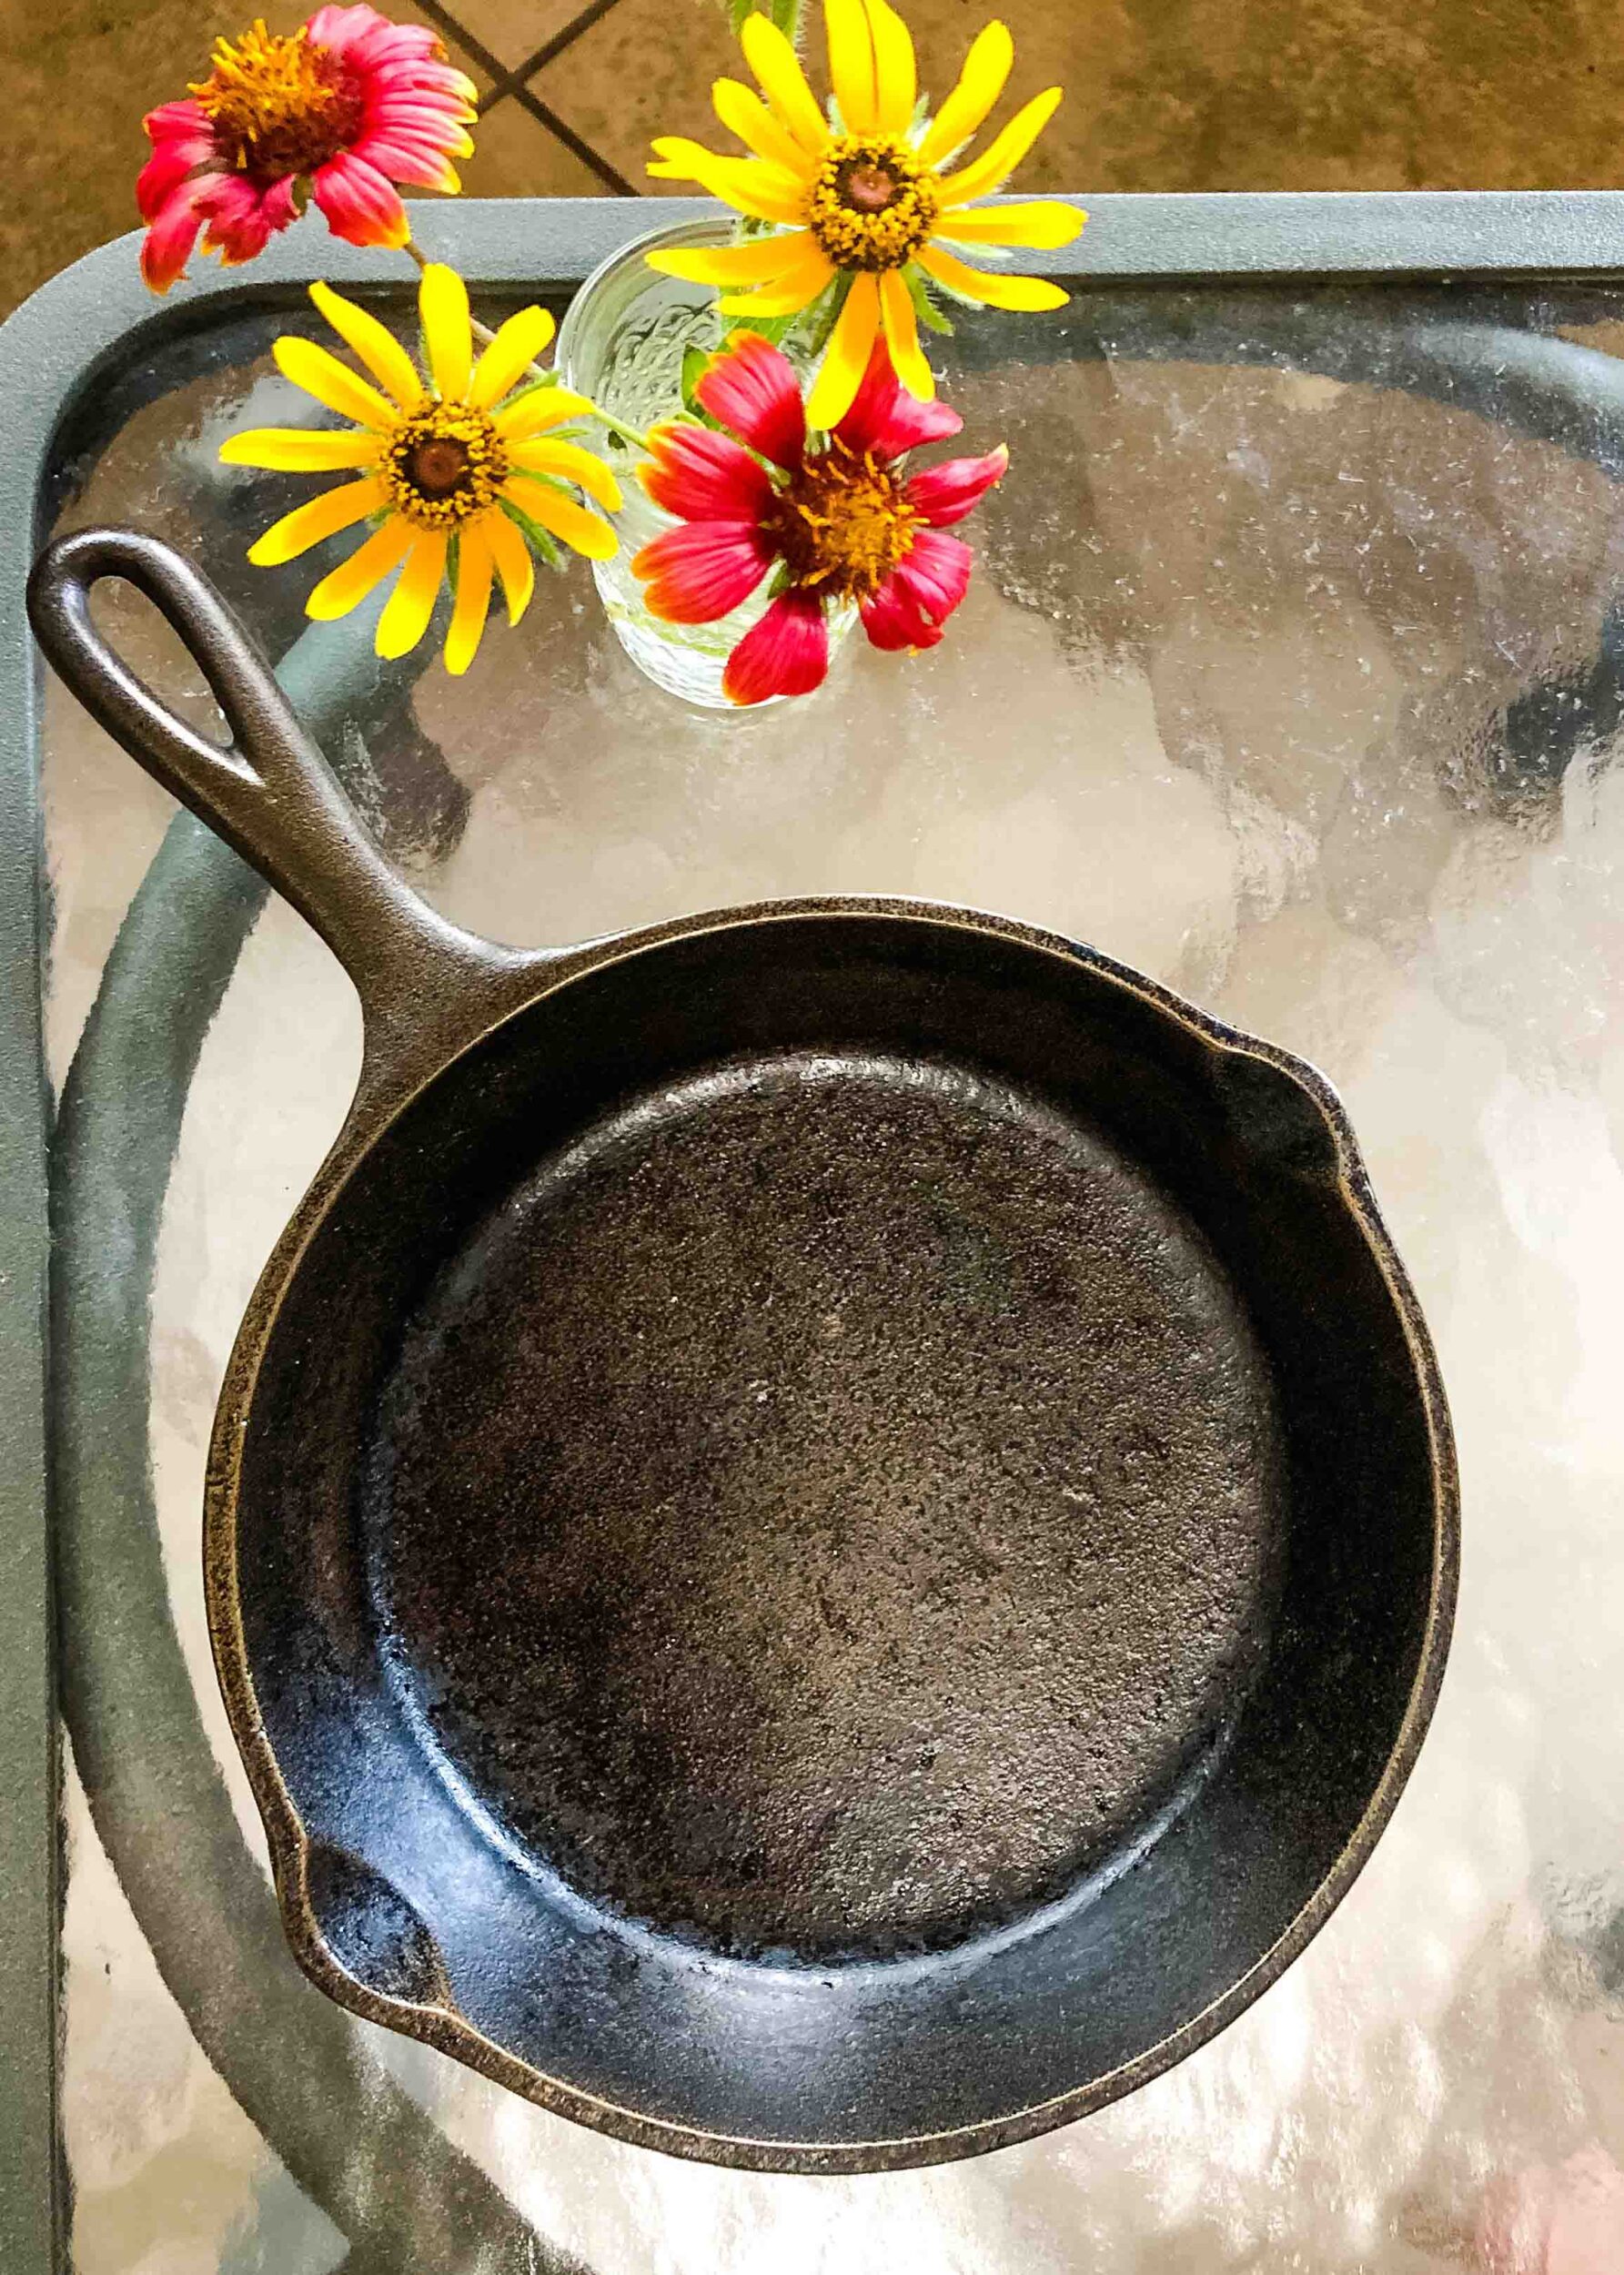 https://healthychristianhome.com/wp-content/uploads/2021/07/cast-iron-skillet-2-1785x2500.jpg